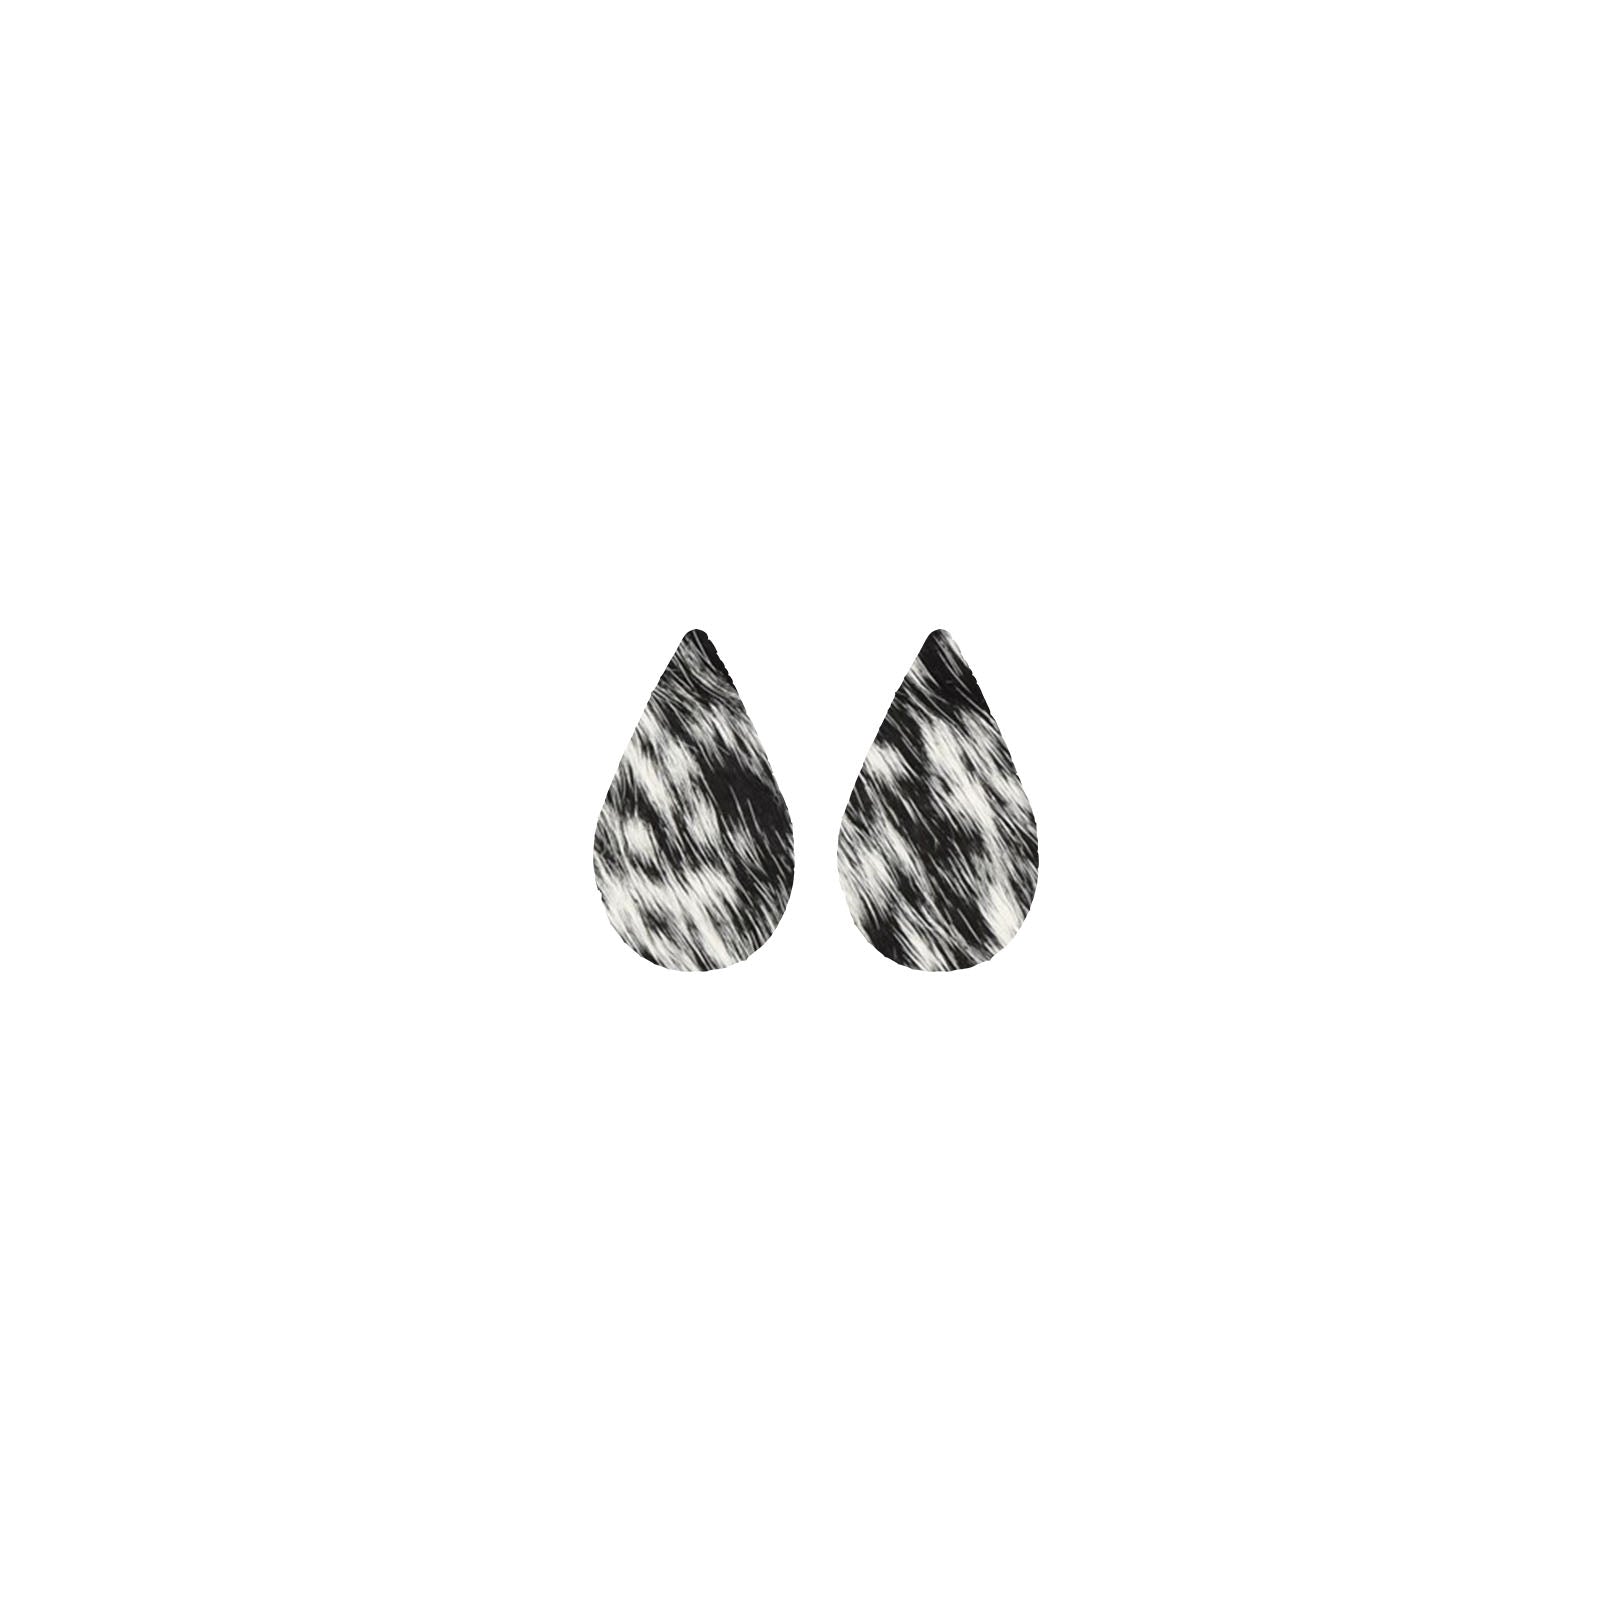 Heavy Spotted Black and Off White Hair On Die Cut Earrings, Mini Teardrop | The Leather Guy